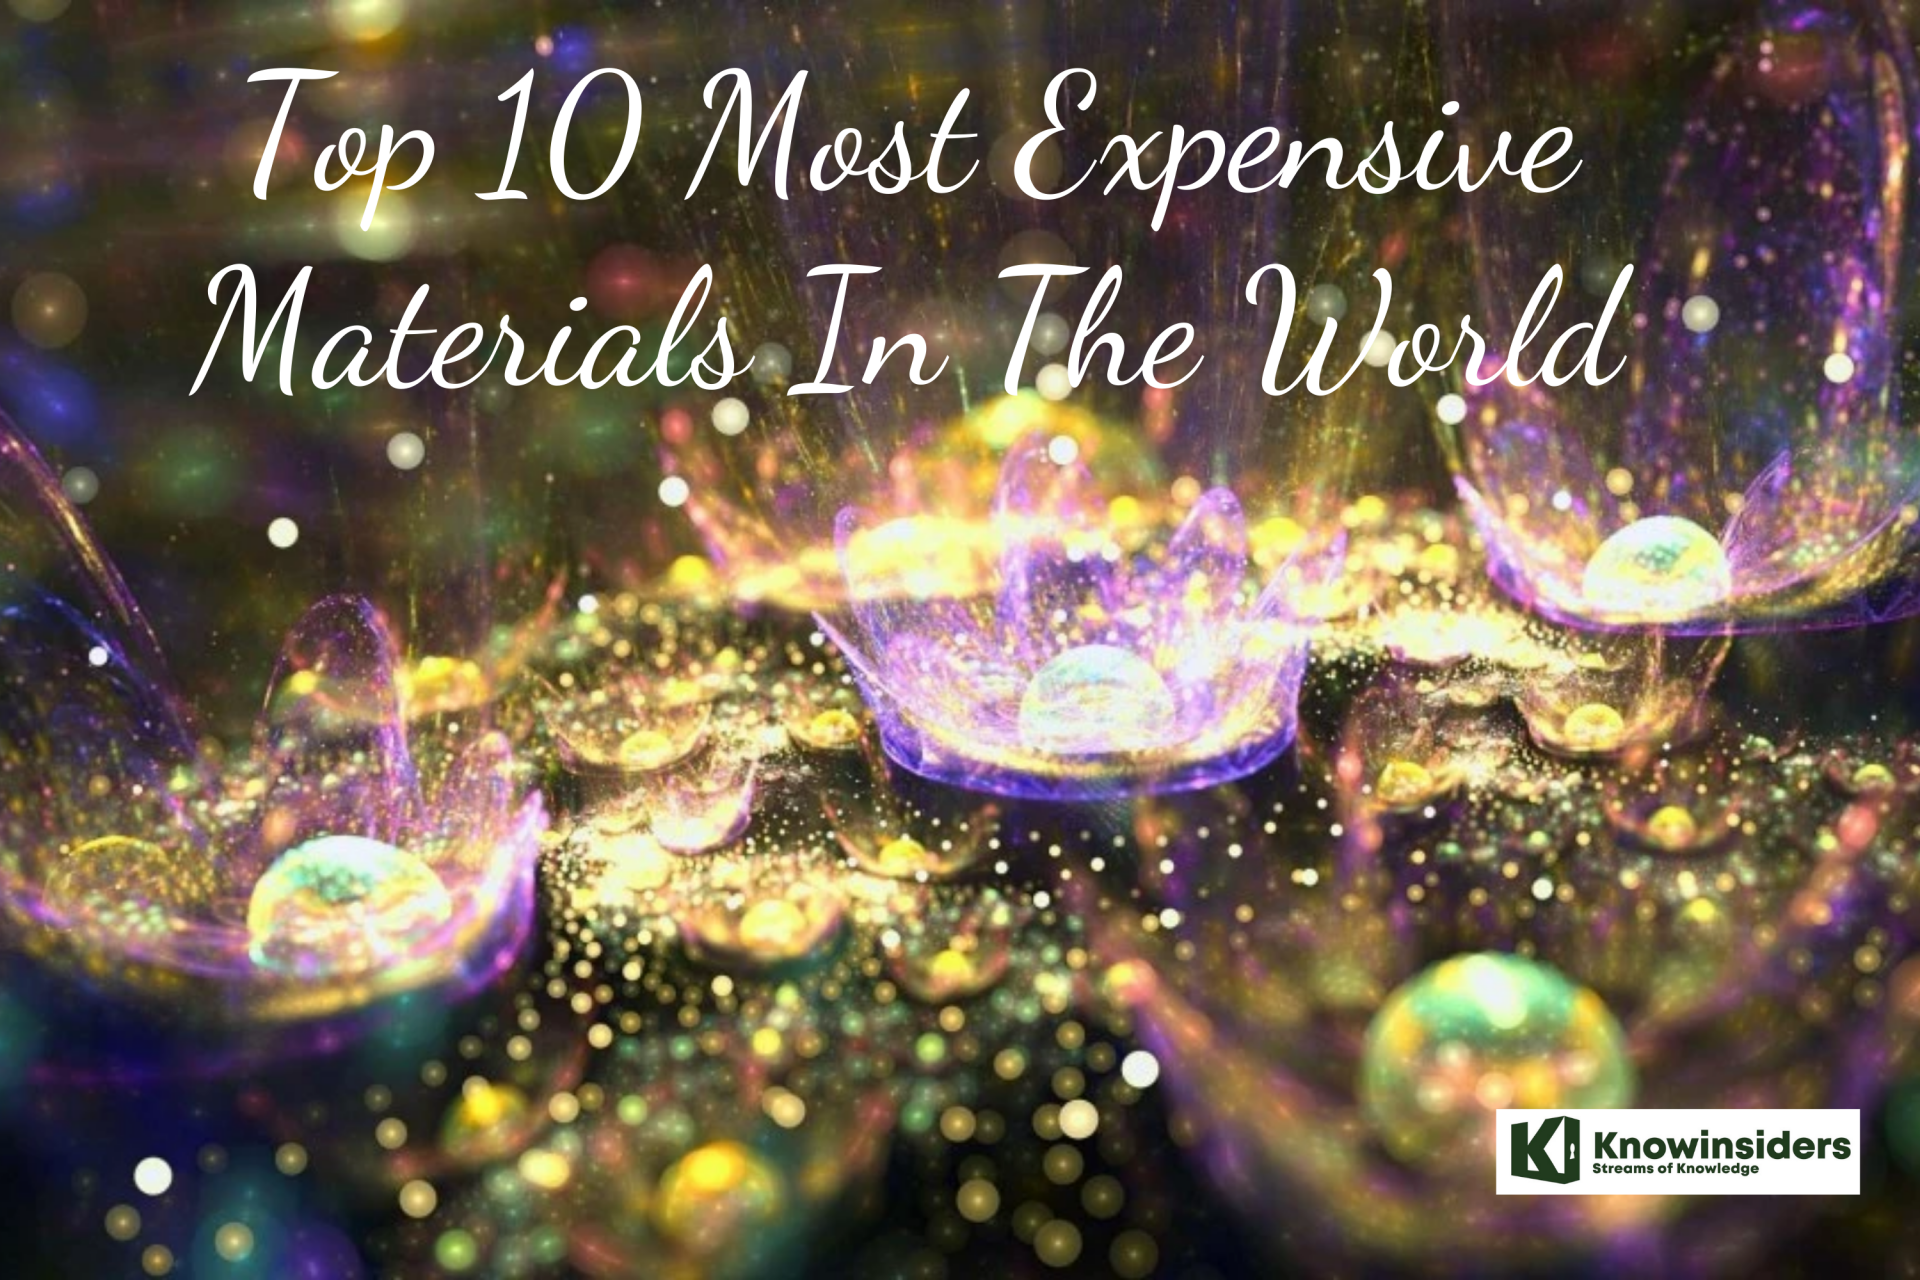 Top 10 Most Expensive Materials In The World